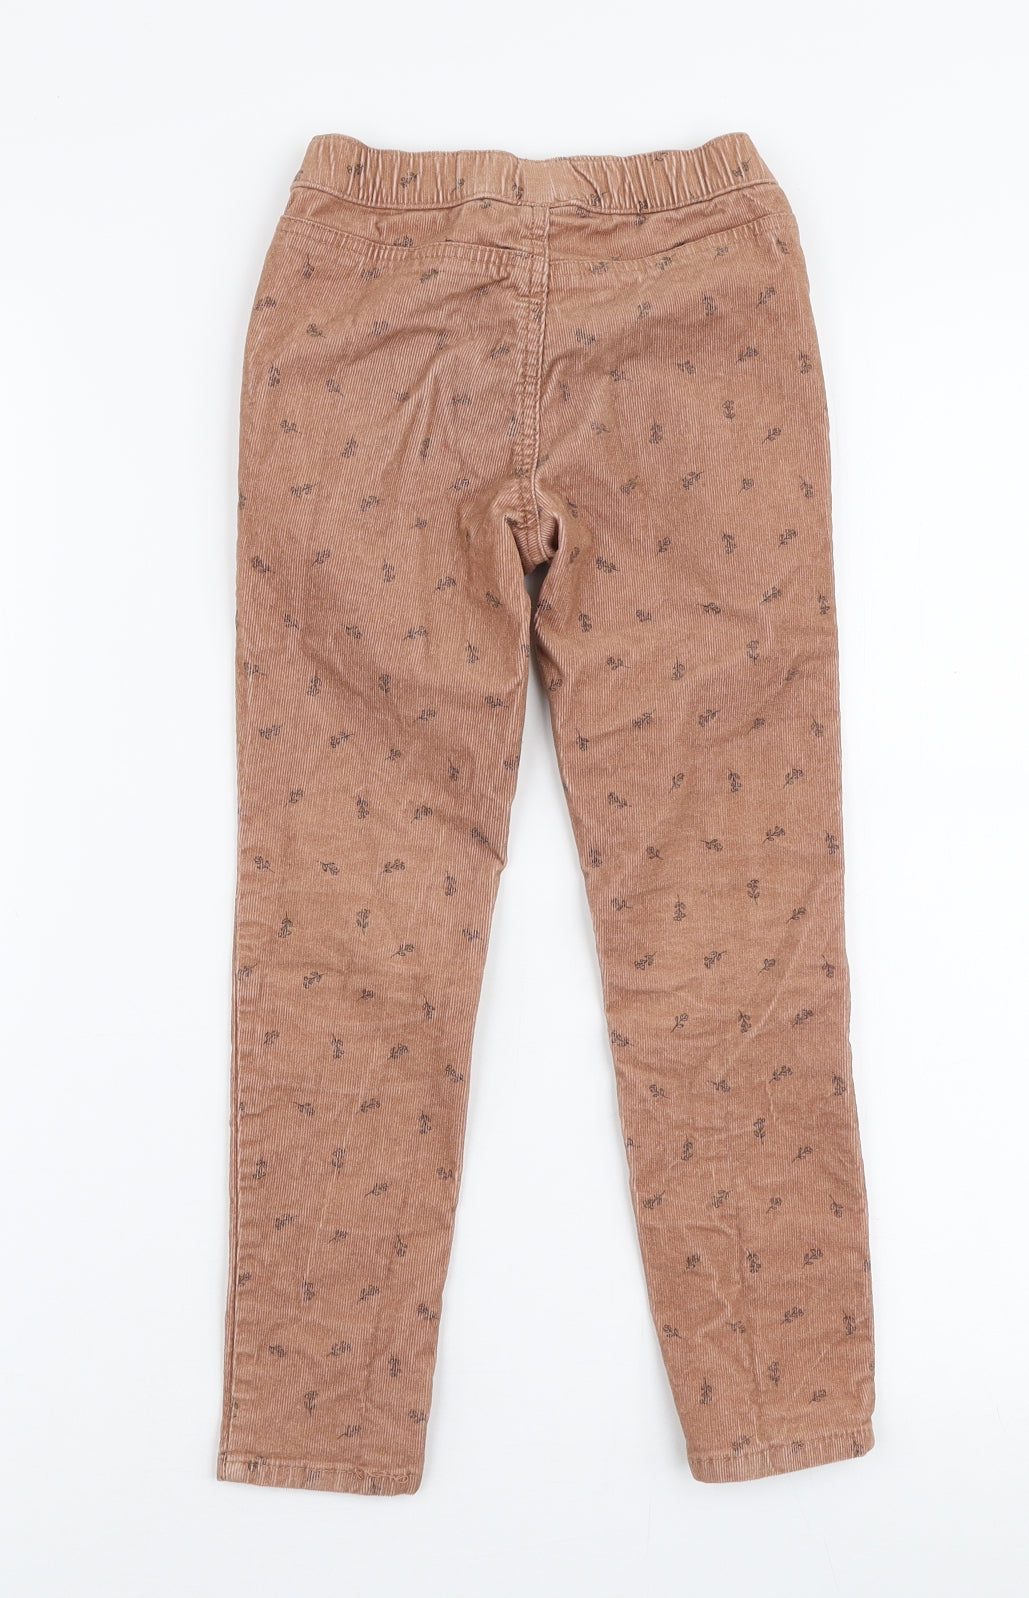 H&M Girls Beige Floral Cotton Jegging Jeans Size 5-6 Years  Slim Pullover